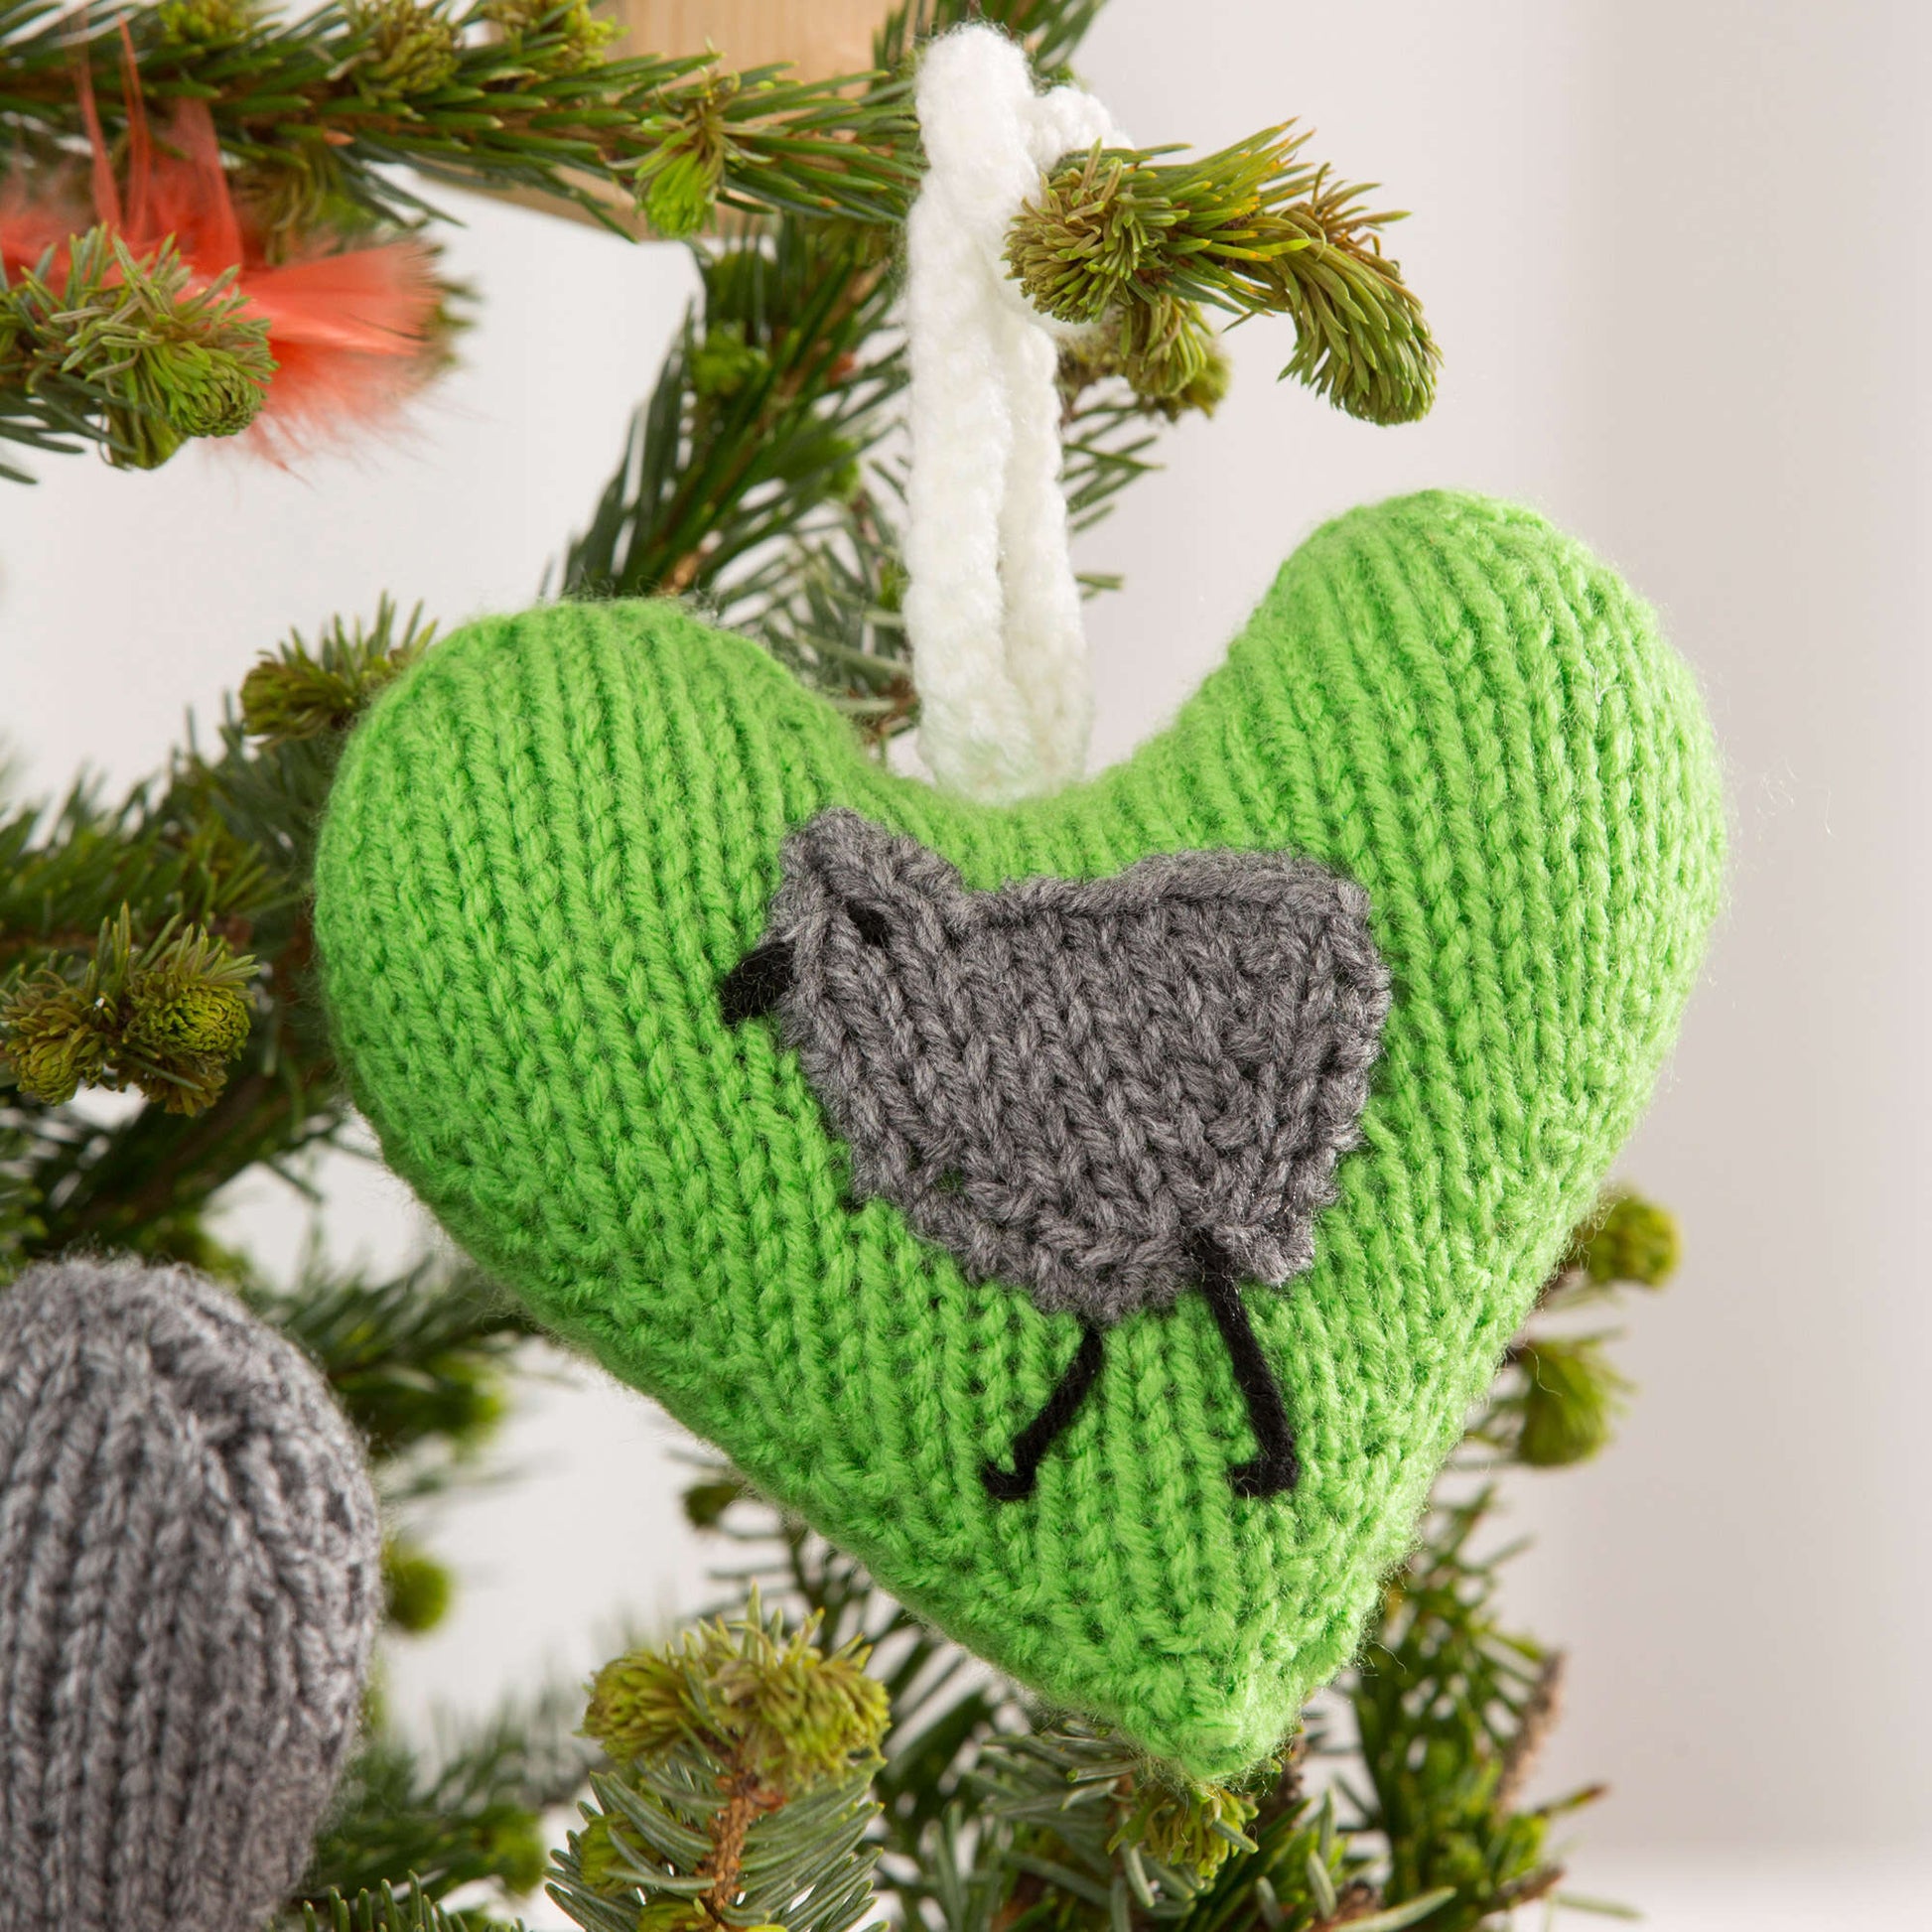 Free Red Heart Holiday Heart Ornaments Knit Pattern